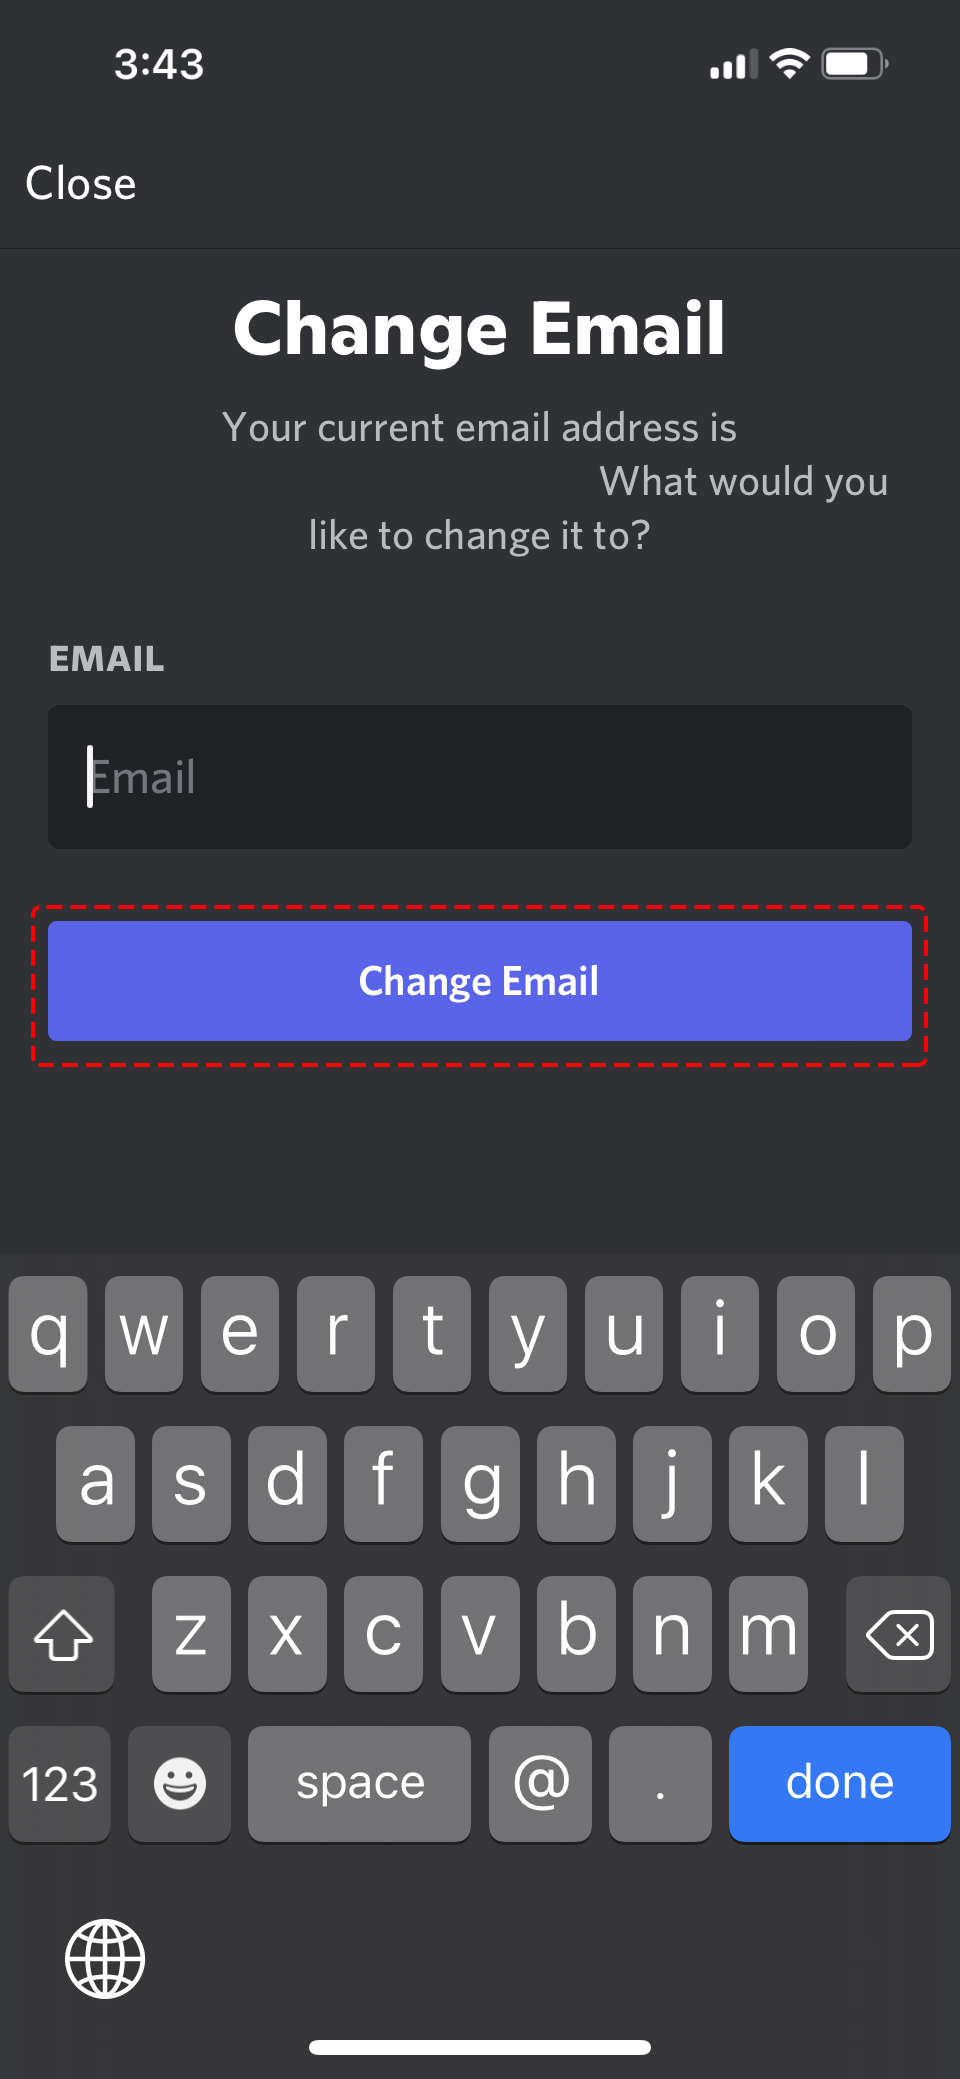 ios-change-email-page-how-to-change-email.png